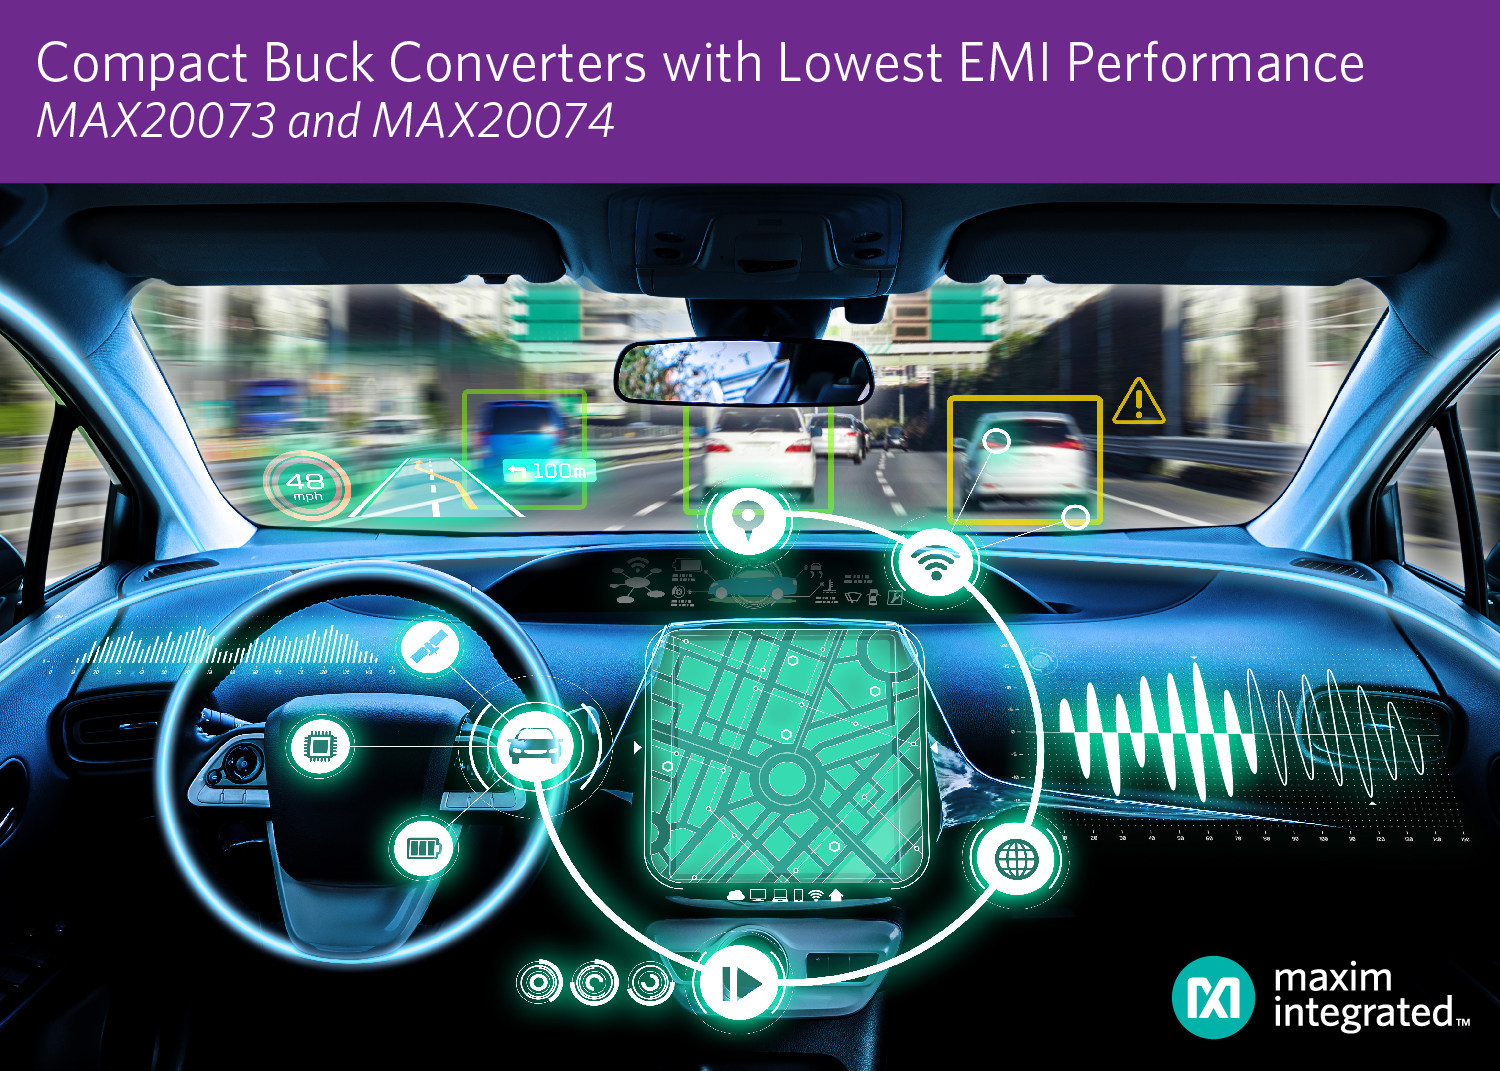 Compact Synchronous Buck Converters Provide Industry's Lowest EMI Performance for Automotive Infotainment and ADAS Applications